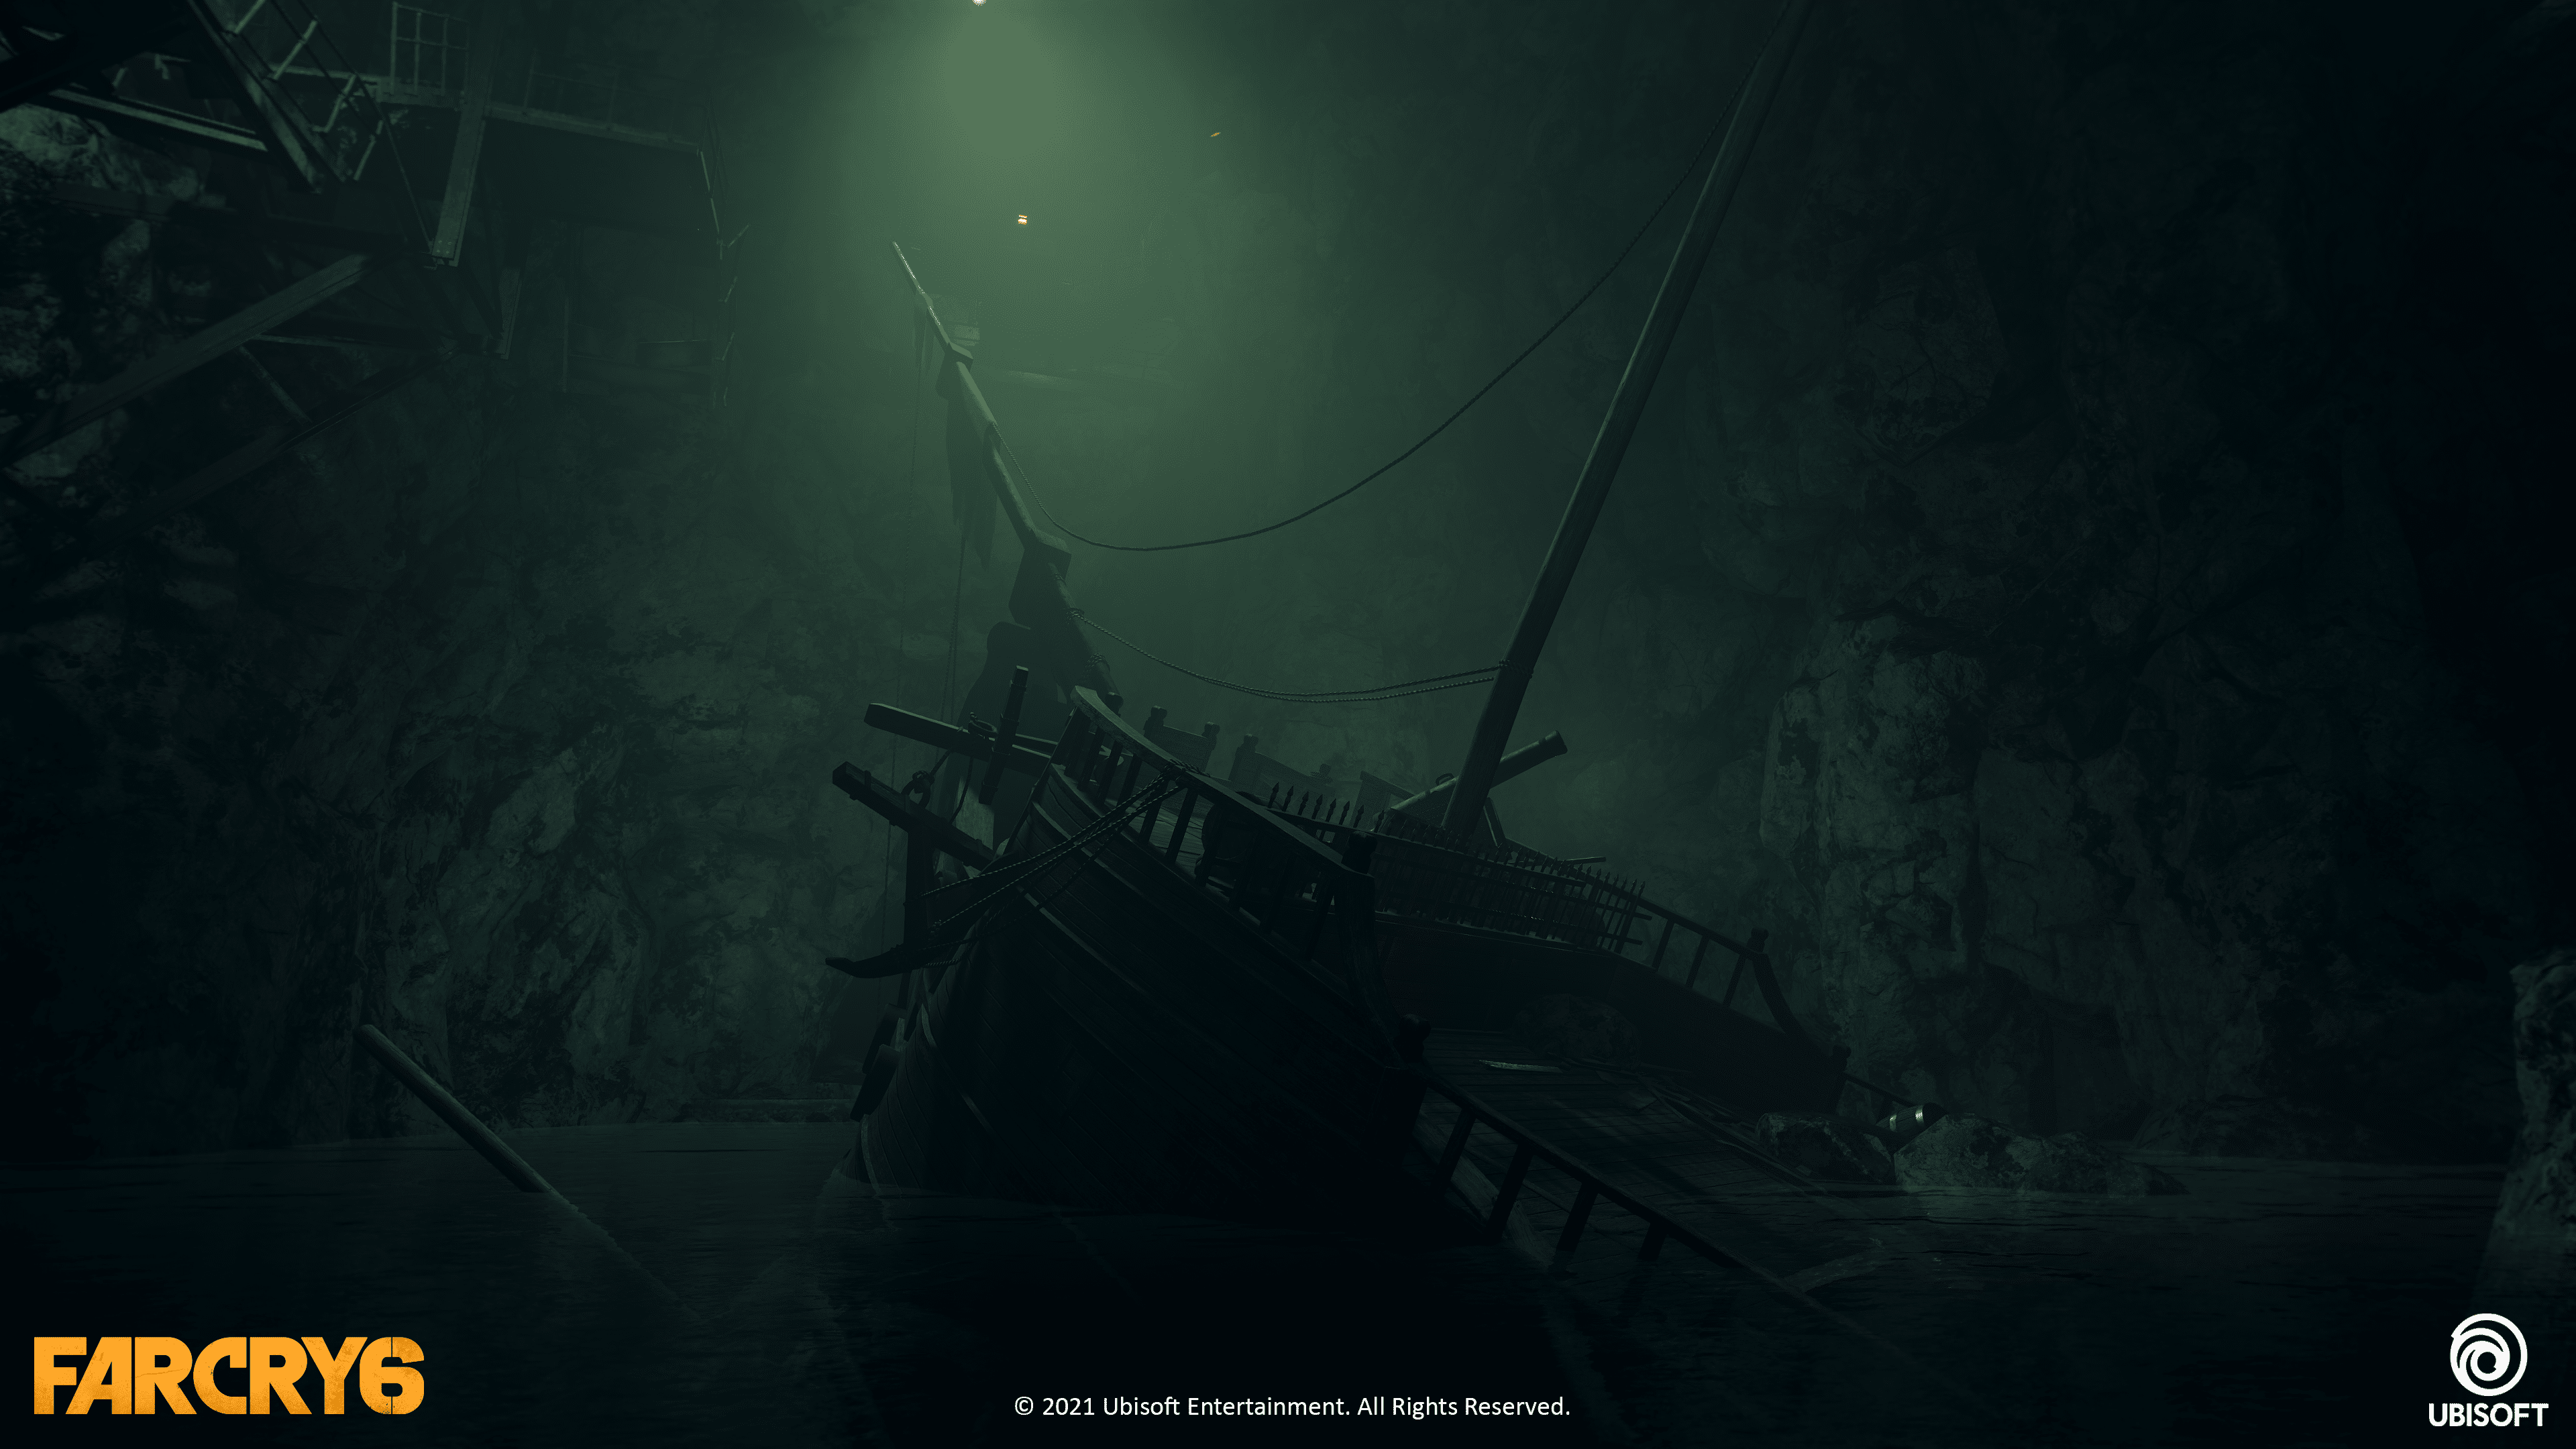 Shipwreck at bottom of ocean bathed in green light